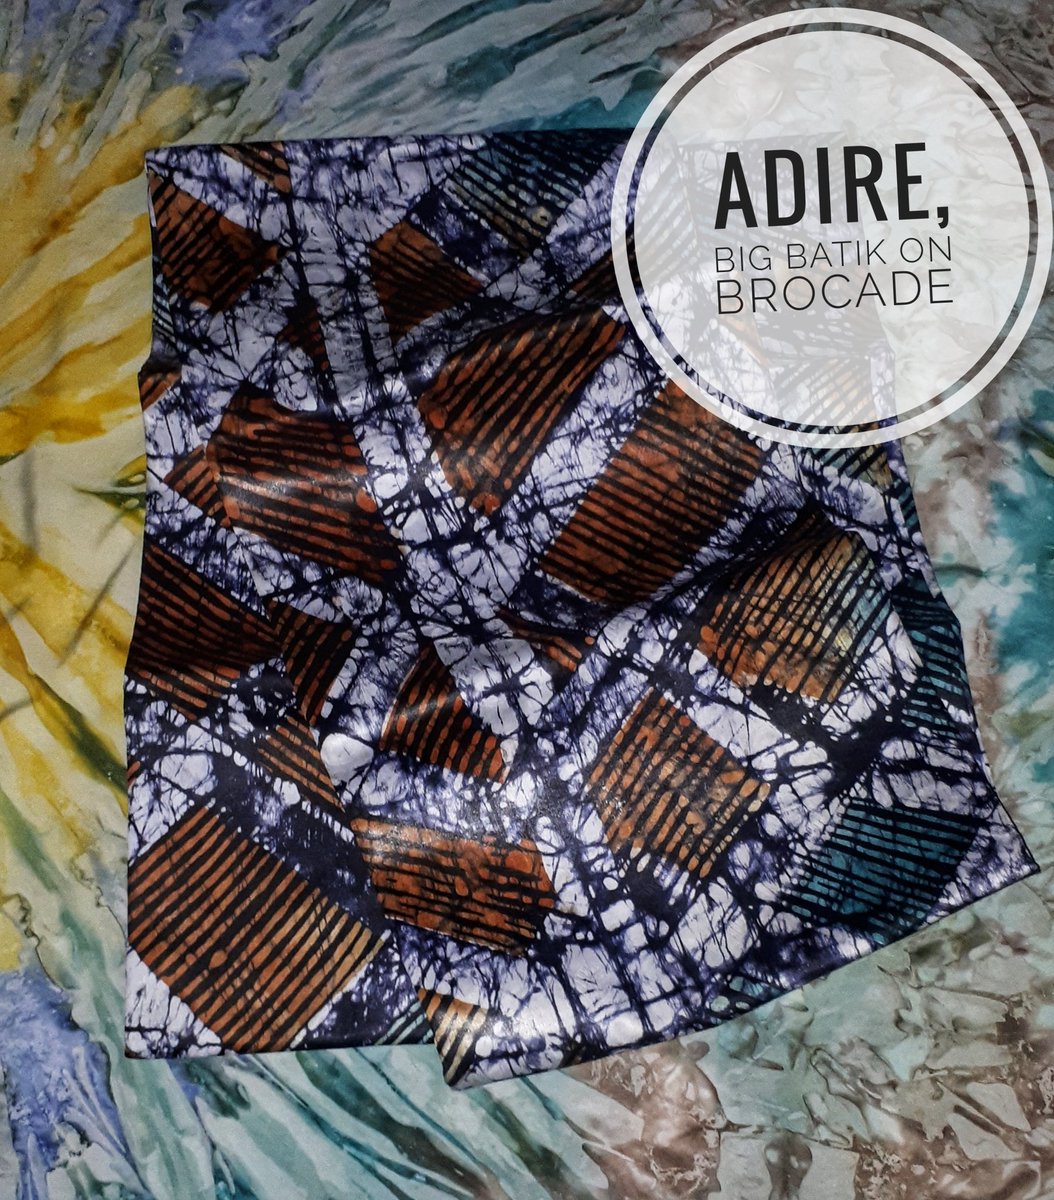 Adire on Premium soft, lush brocade fabric .Perfect for everything - trads, formal, skirts, trousers etc Yardage: 5 yards.Price: N12,000 only.To order: Send a DM/WhatsApp 07031984096 to order Nationwide/Worldwide delivery available.Please help retweet